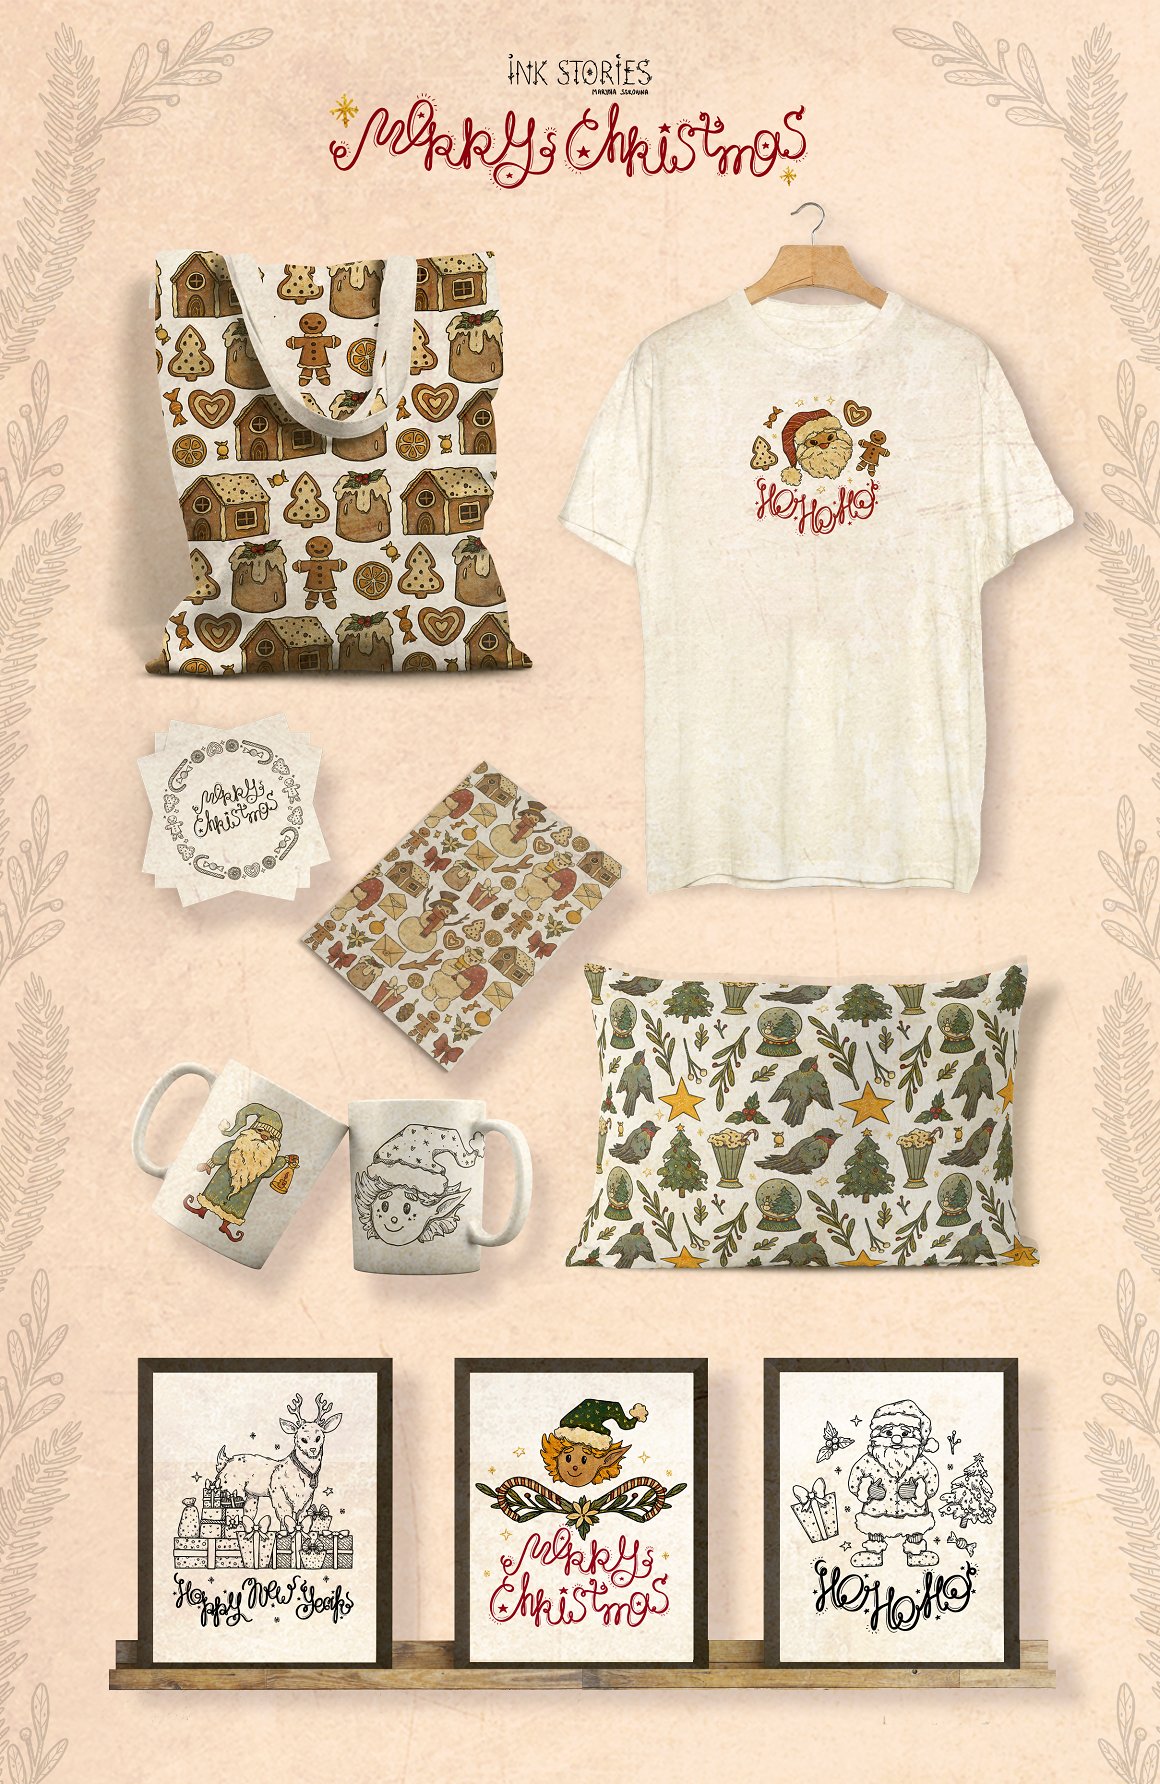 T-shirt, shopping bag, pillow, cups, posters and other products with xmas patterns.